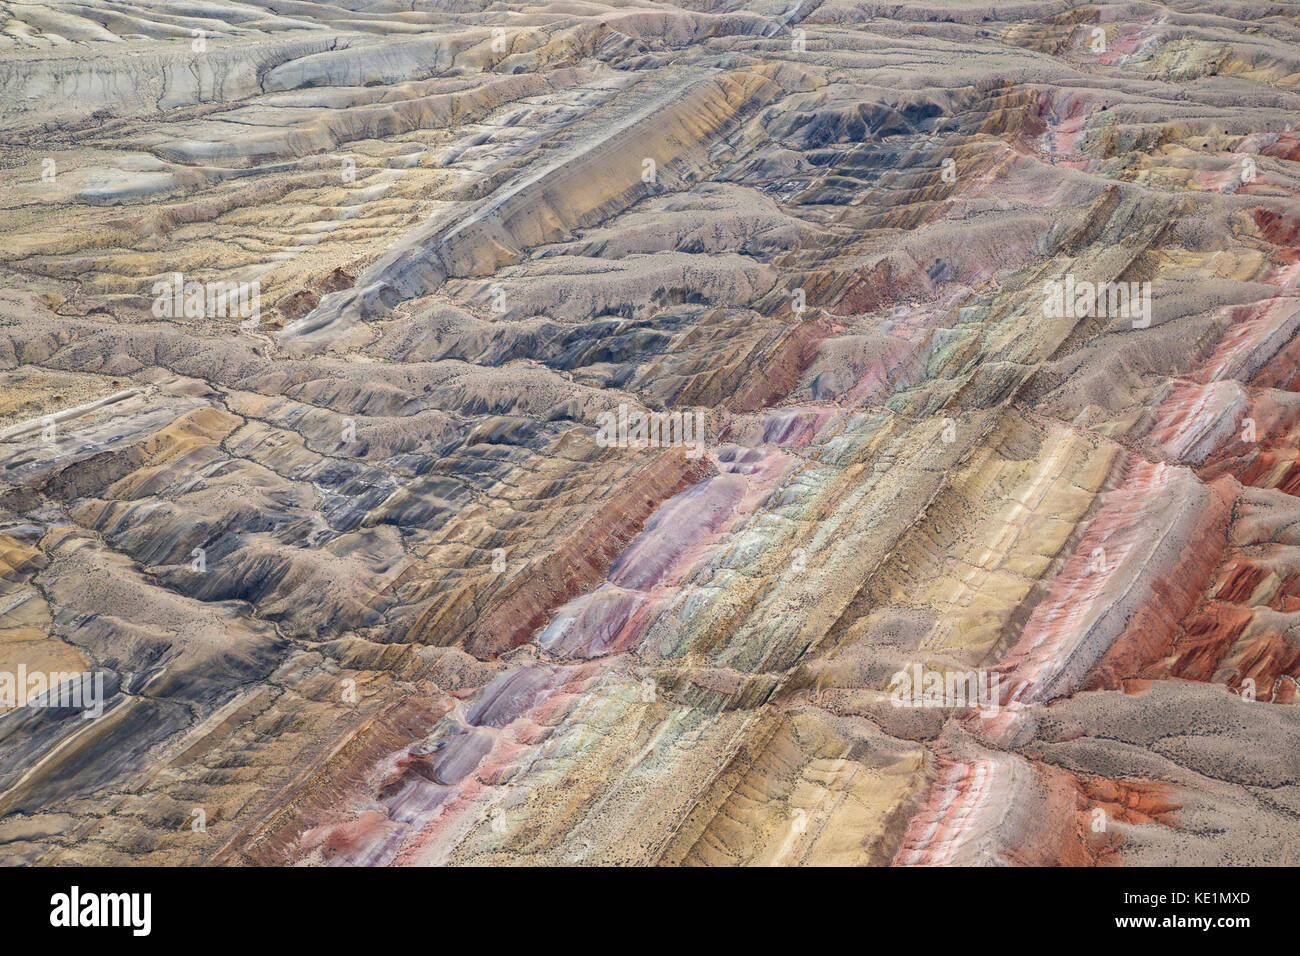 Aerial view of the Sheep Mountain Anticline in Wyoming Stock Photo